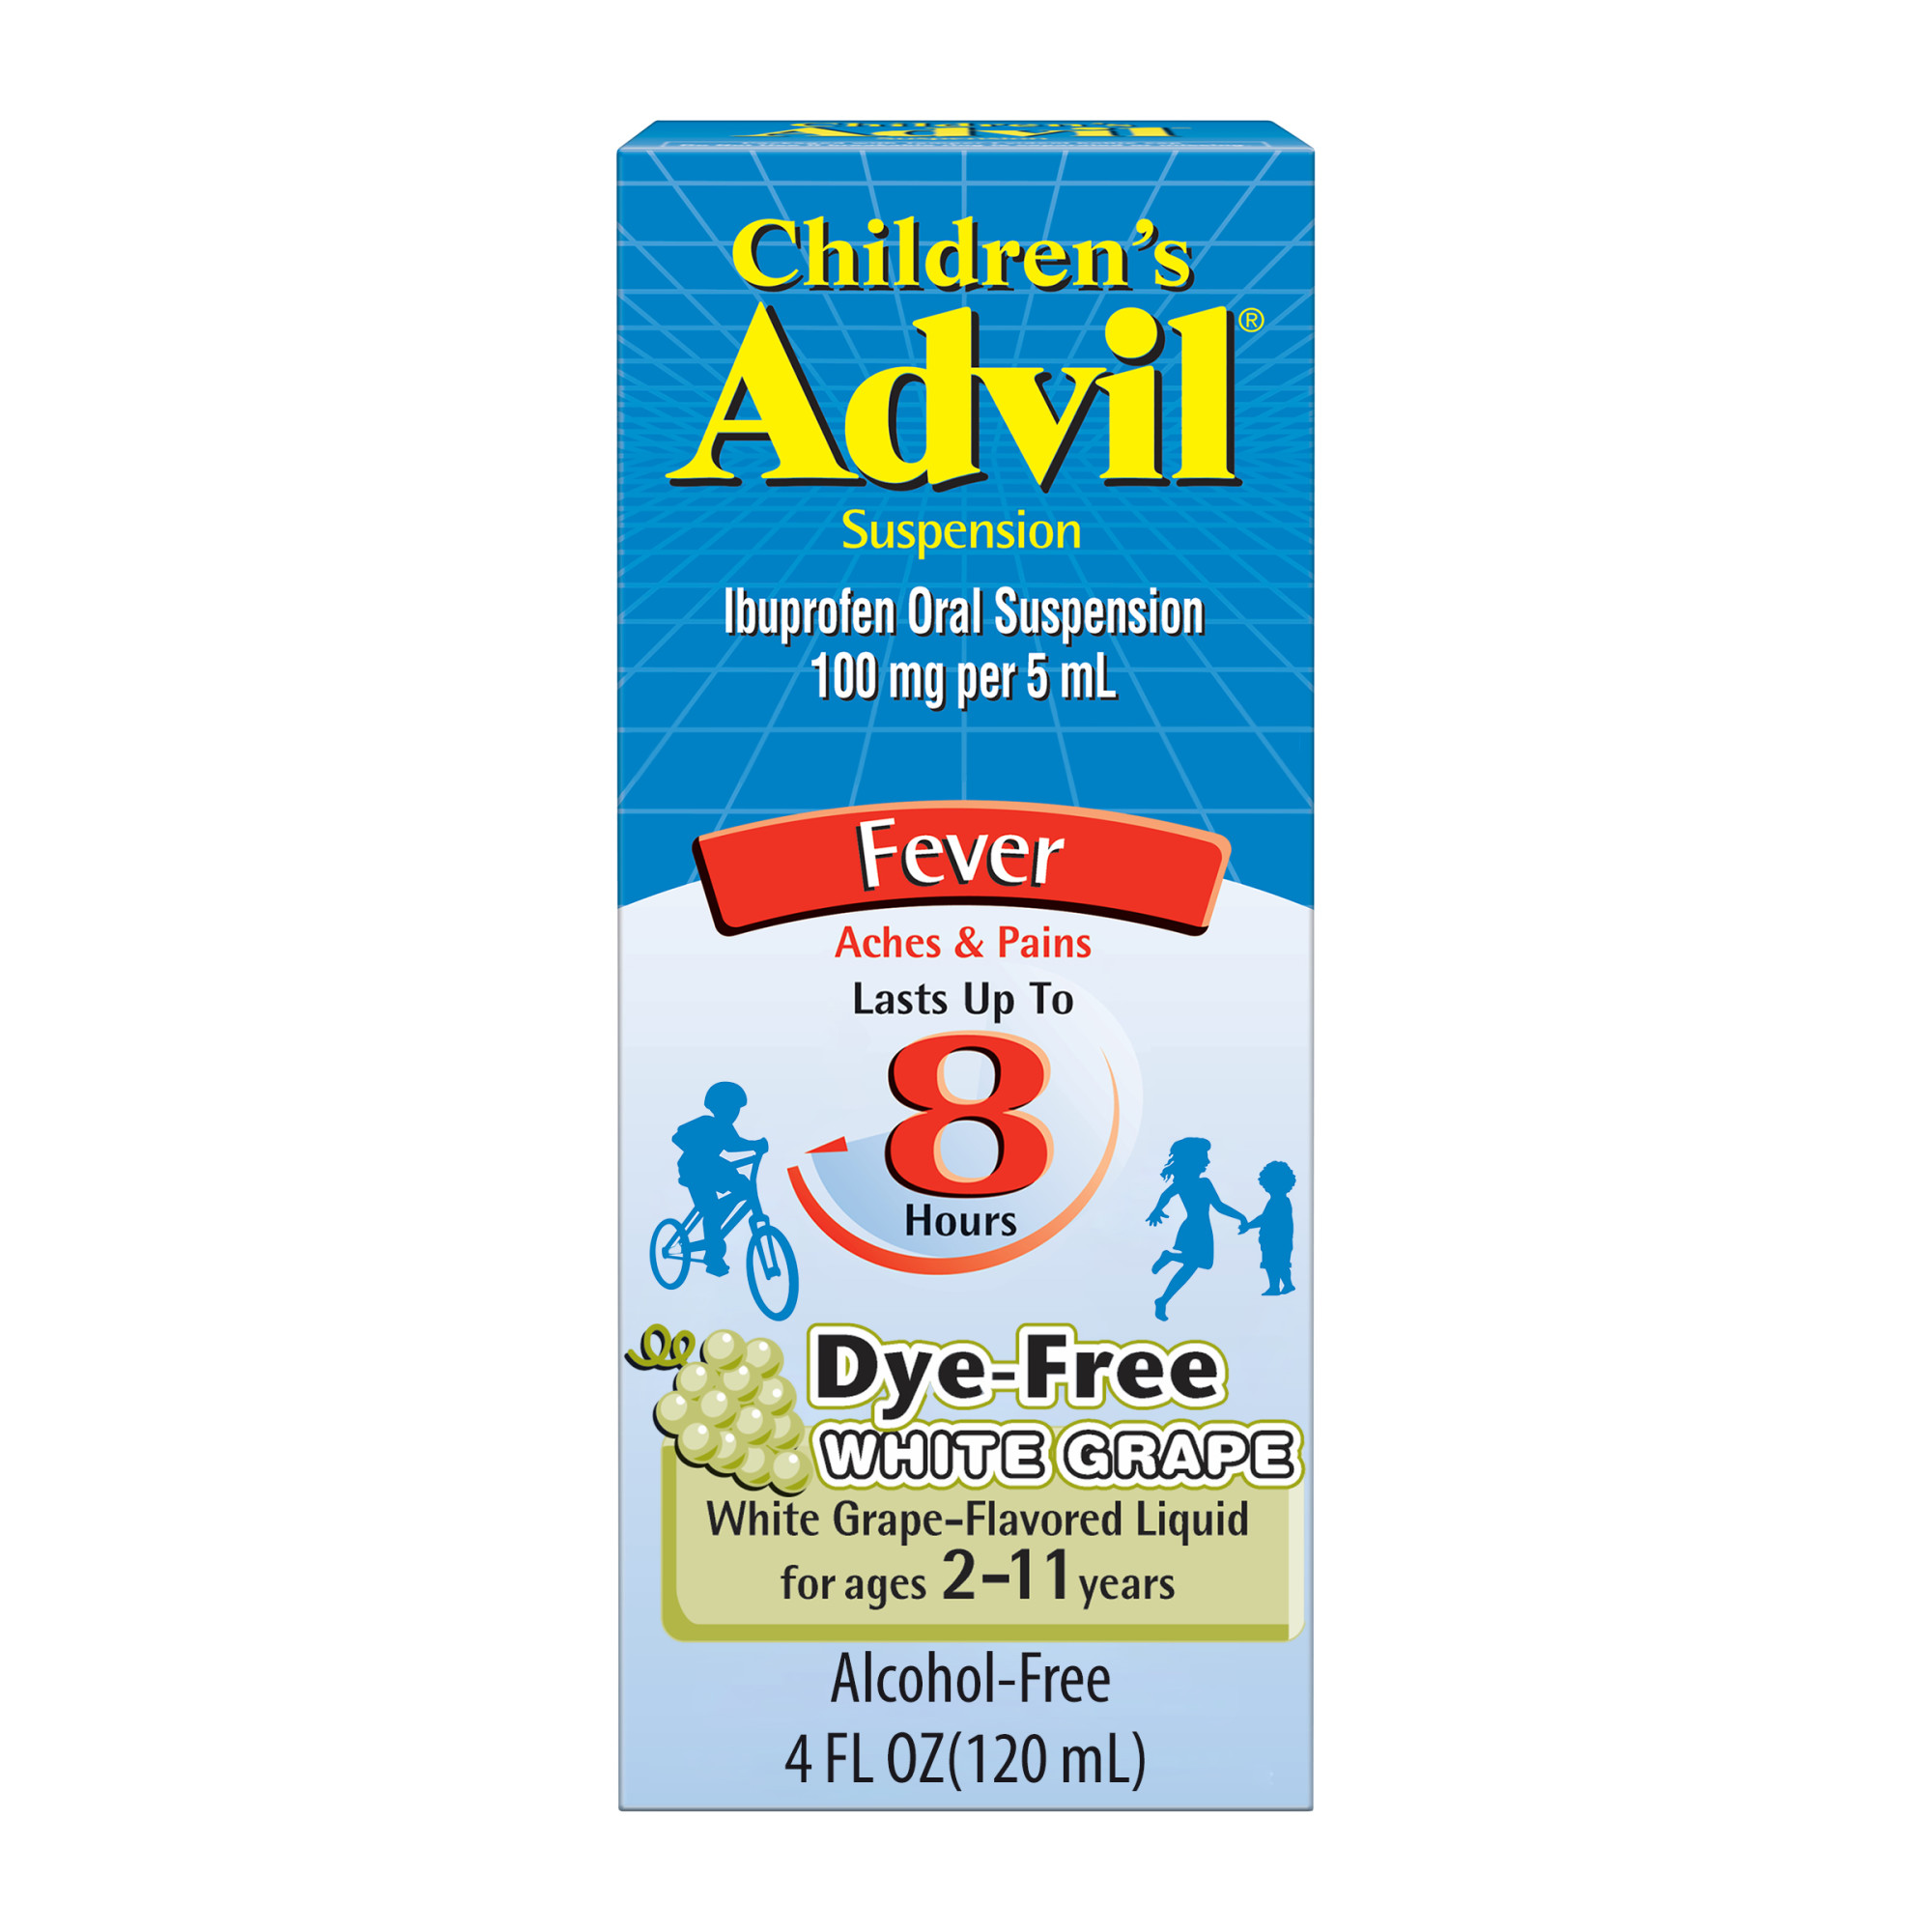 Advil Children's Pain Relievers and Fever Reducer Dye Free Liquid, 100Mg Ibuprofen, 4 Fl Oz - image 1 of 10